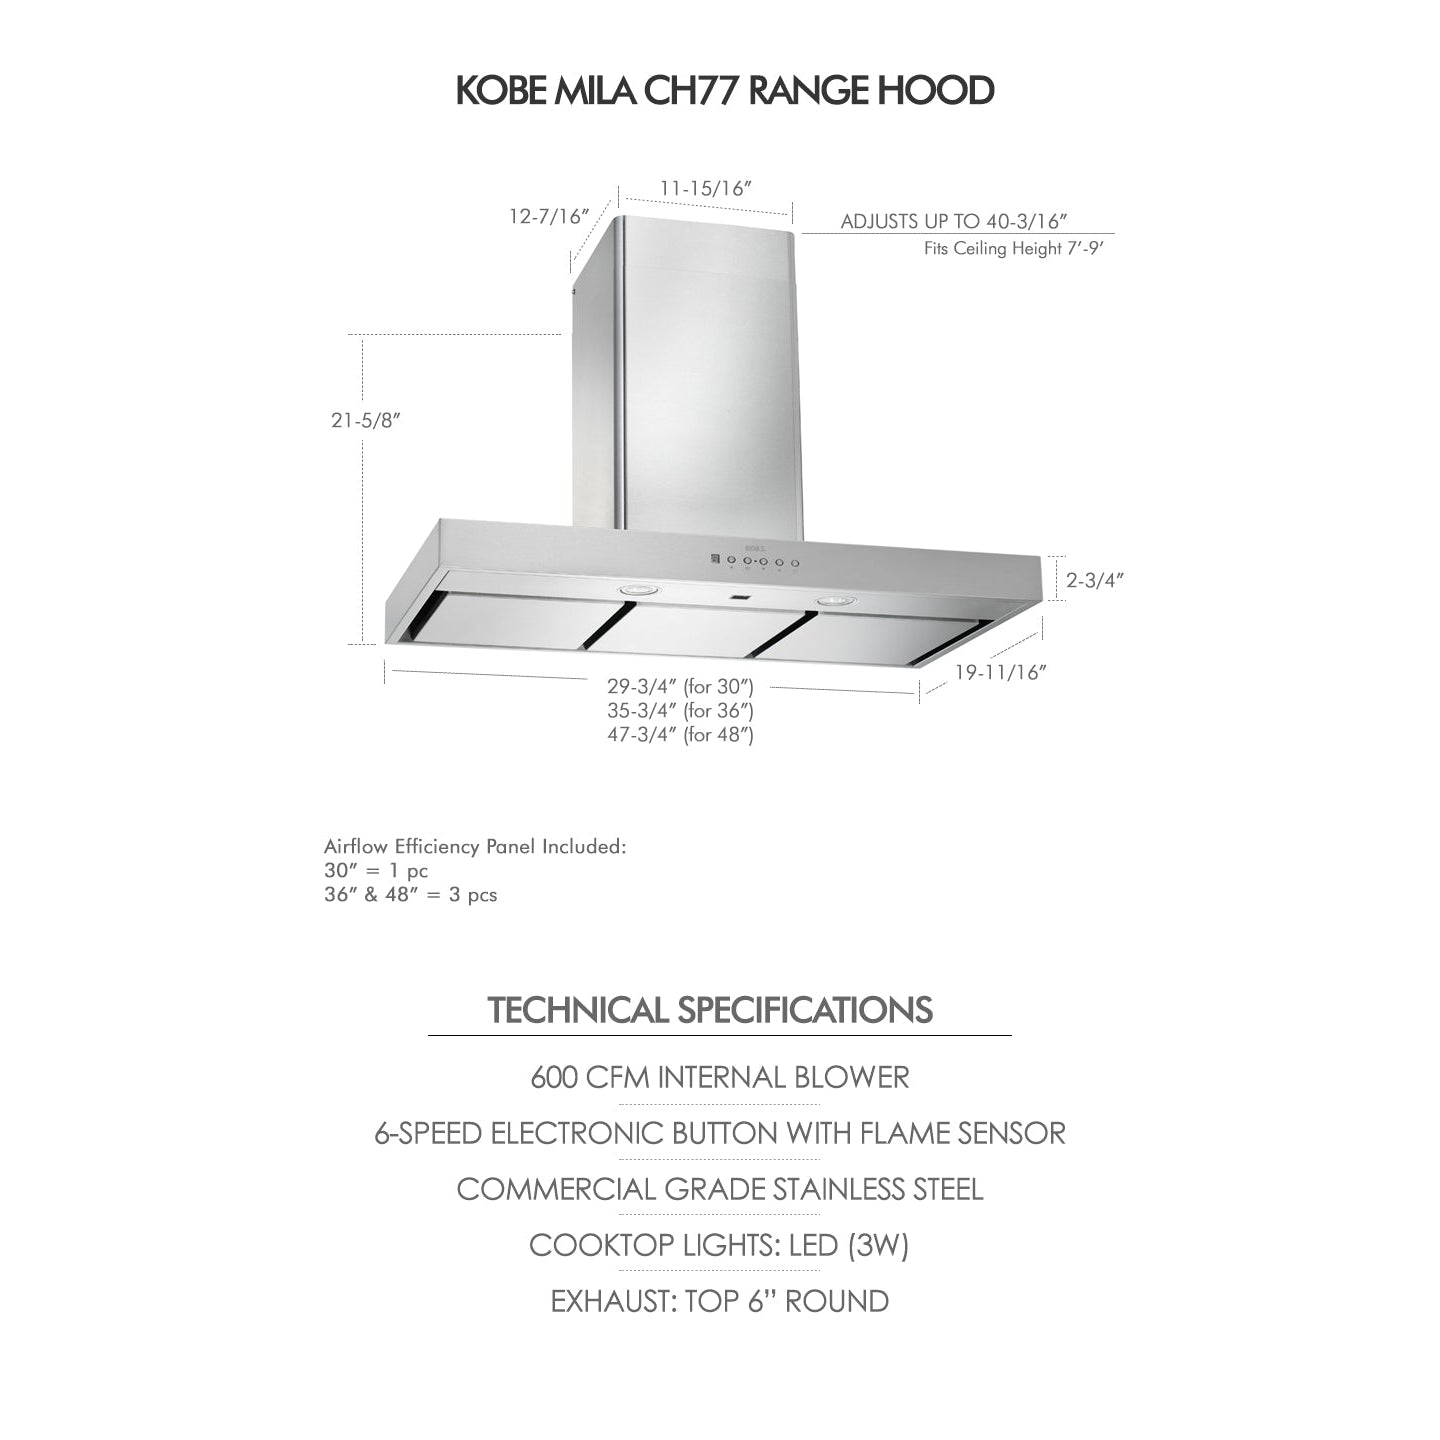 KOBE Premium Mila CH77 SQ6-XX Series 36" Hands-Free Wall Mount Range Hood With Flame and Temperature Sensor, Delay Shutoff, 3-Level Lighting, and Parametric Suction